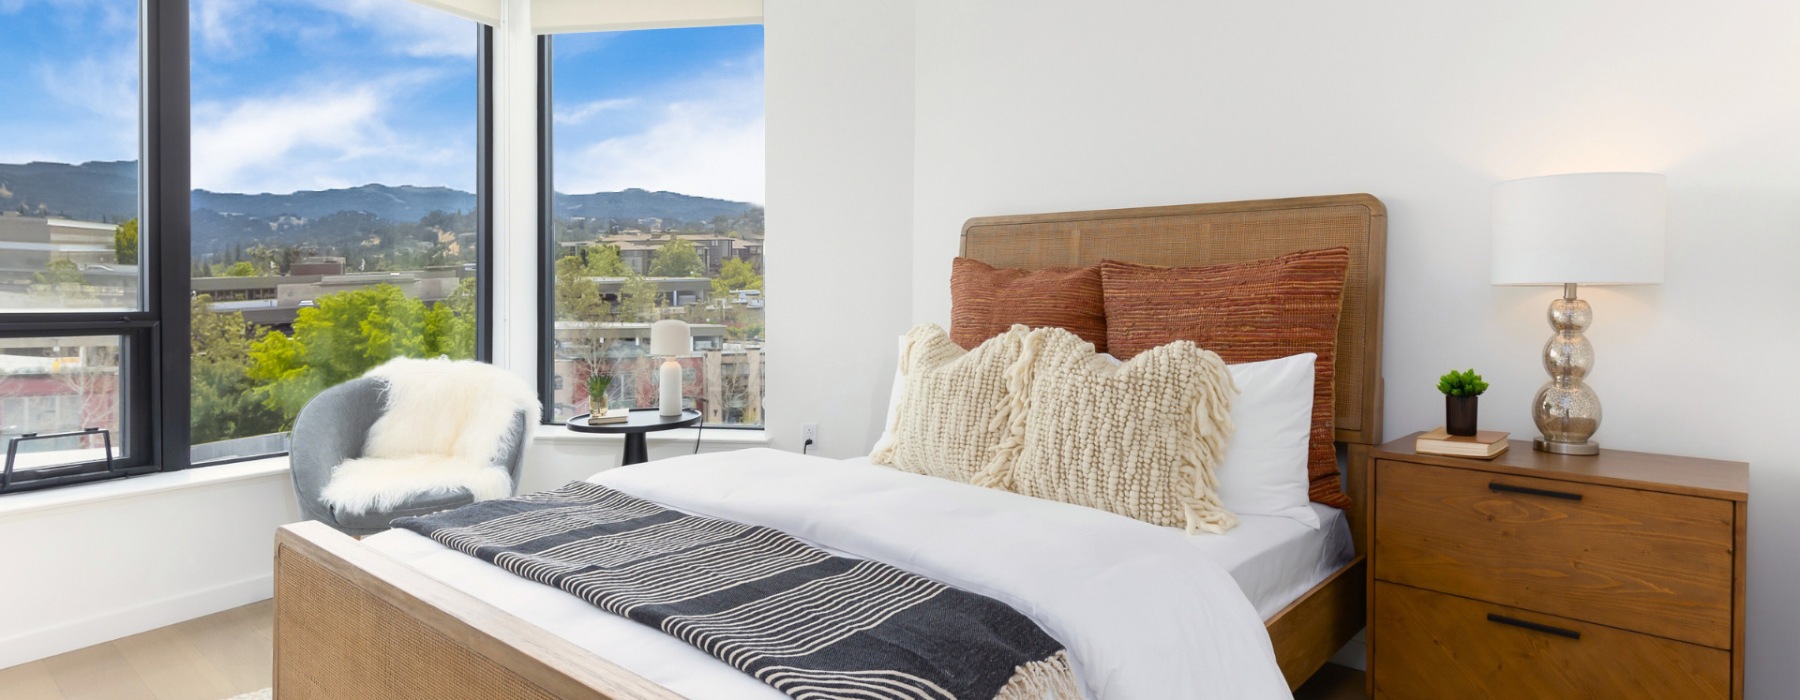 bedroom with large windows and views of walnut creek